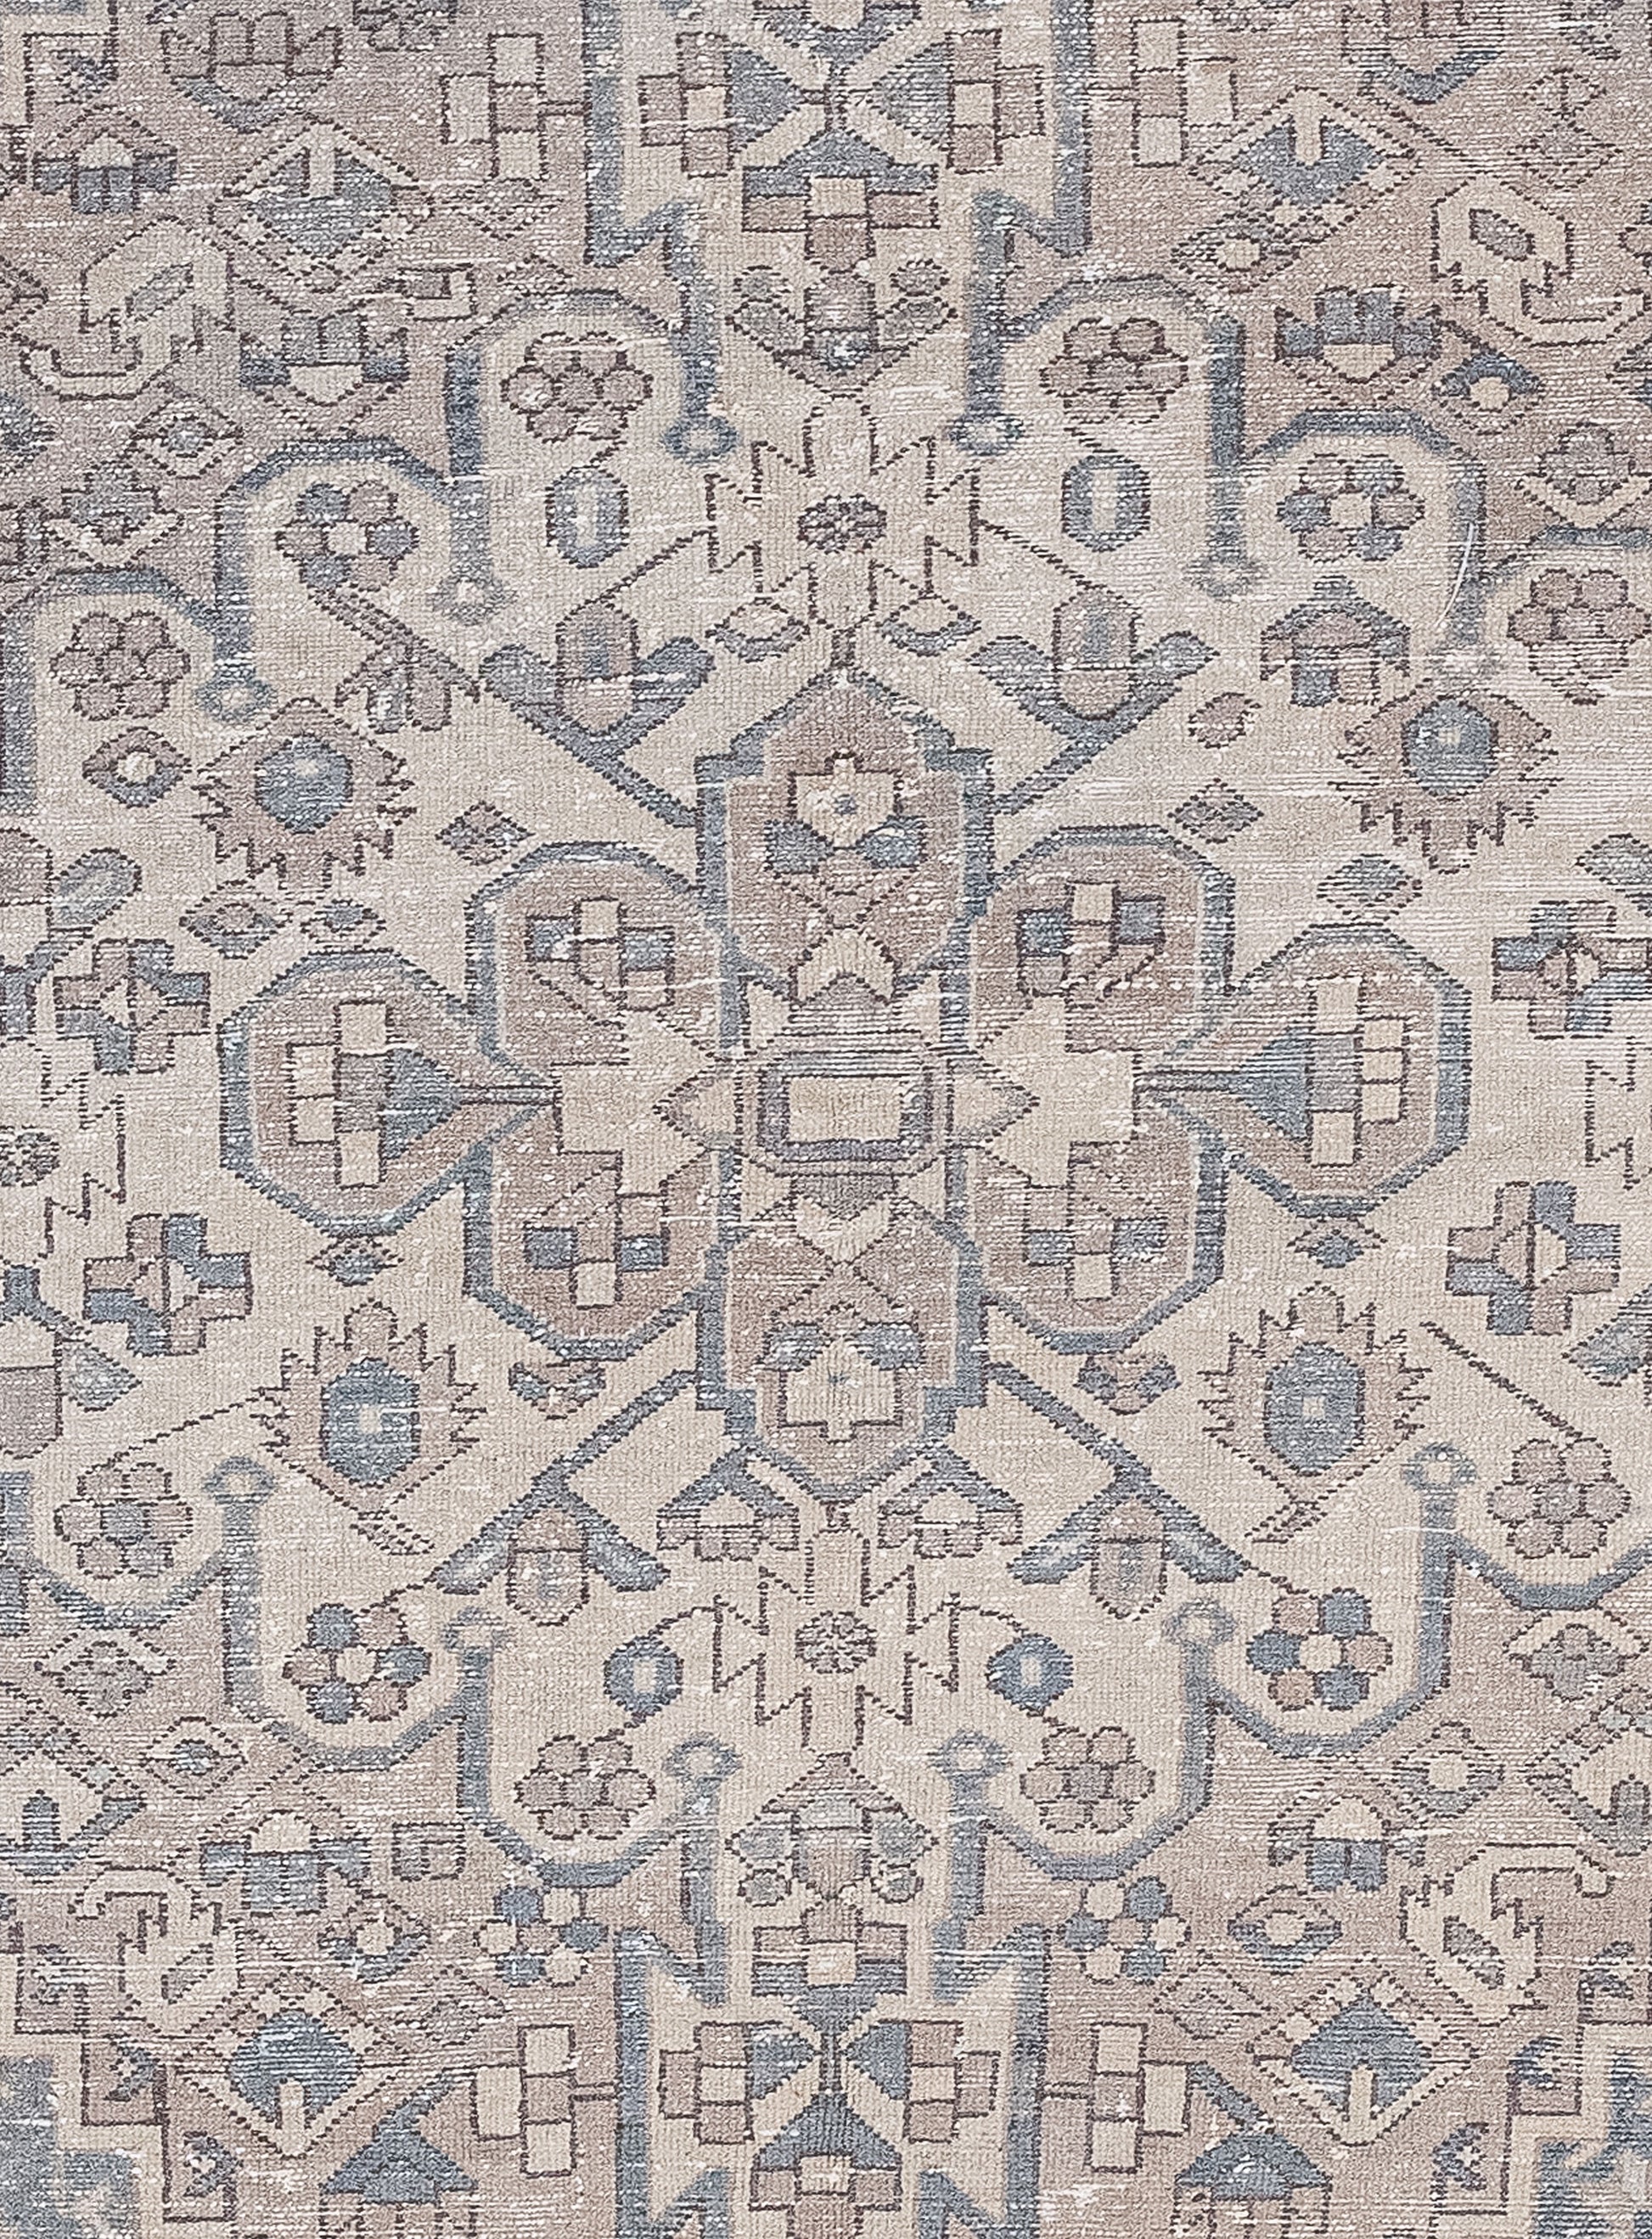 The close-up of the carpet  features an organized design made up of many small abstract squares, hexagons, triangles, and polygons, all arranged symmetrically.